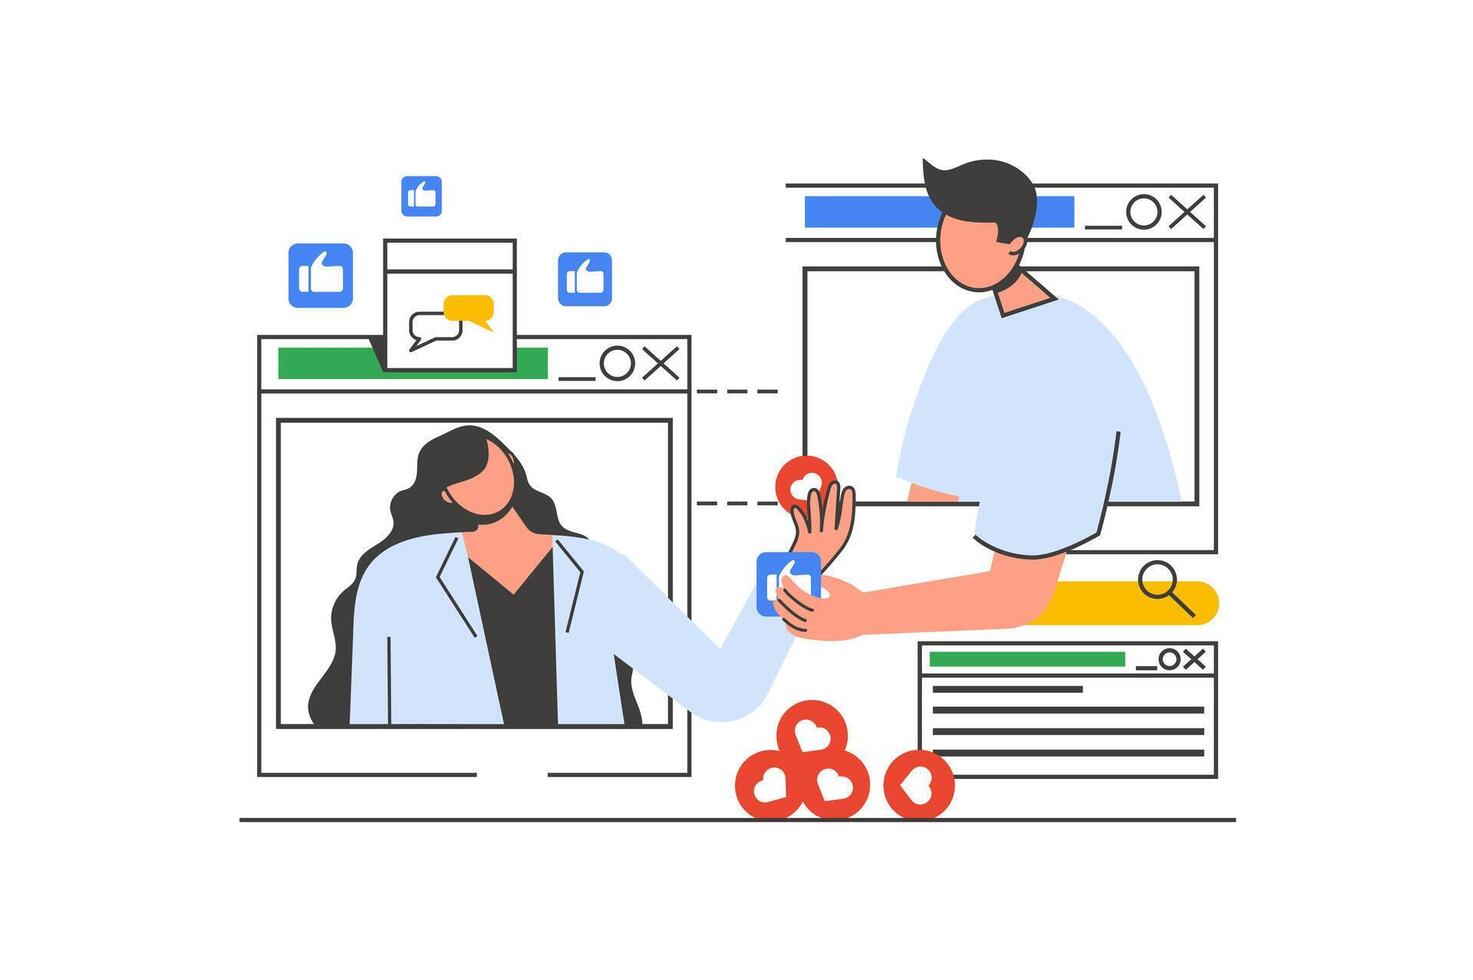 Video chatting outline web concept with character scene. Woman and man connecting via video call screens. People situation in flat line design. Vector illustration for social media marketing material.